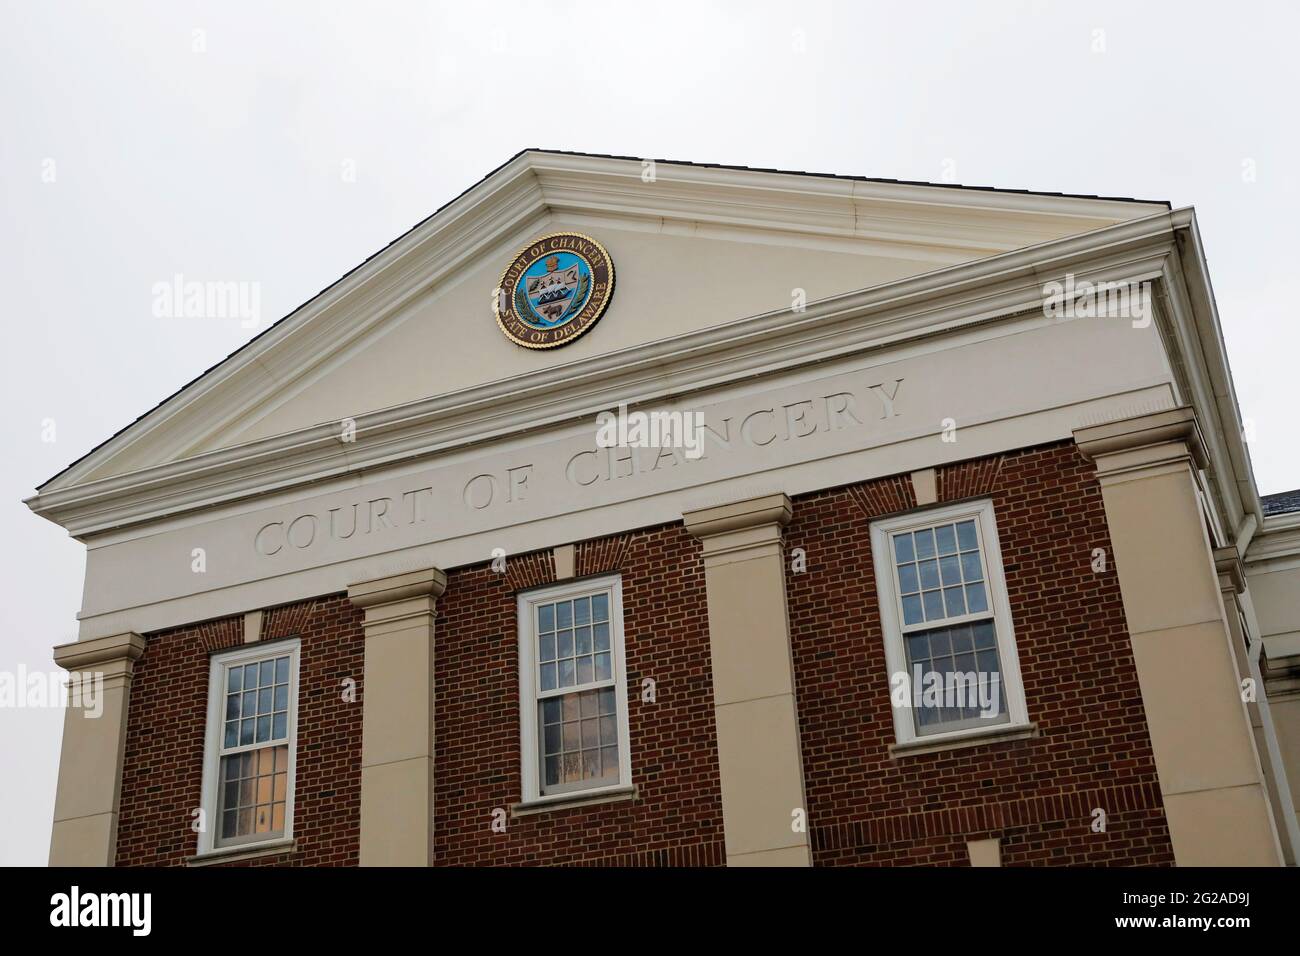 Signage is seen on the exterior of the Sussex County Court of Chancery in Georgetown, Delaware, U.S., June 9, 2021. REUTERS/Andrew Kelly Stock Photo